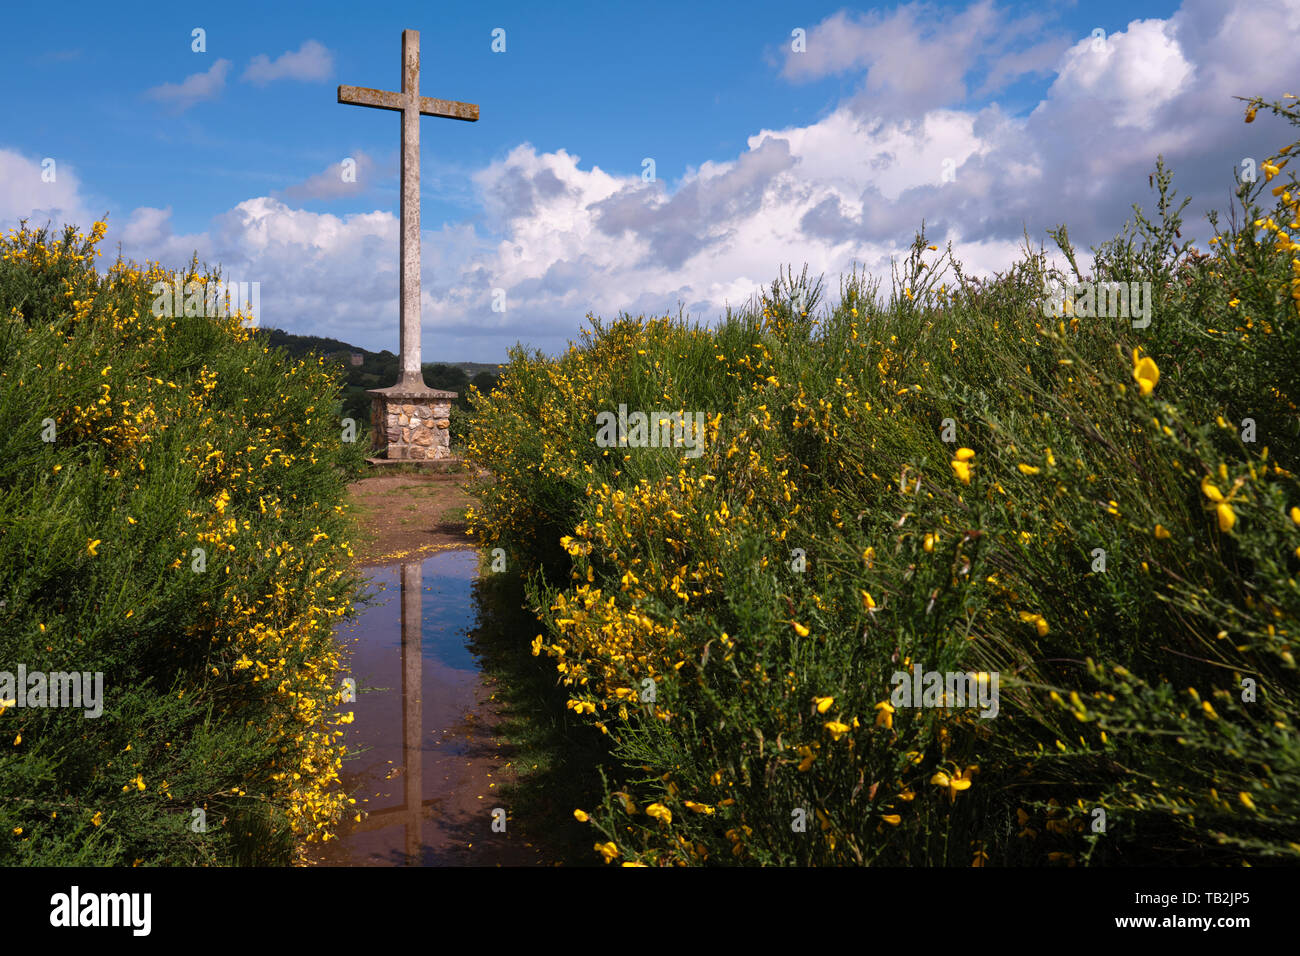 Picture of a cross with it's reflection in a puddle backed by a blue sky with culumus clouds and gorse bushes in bloom. Stock Photo